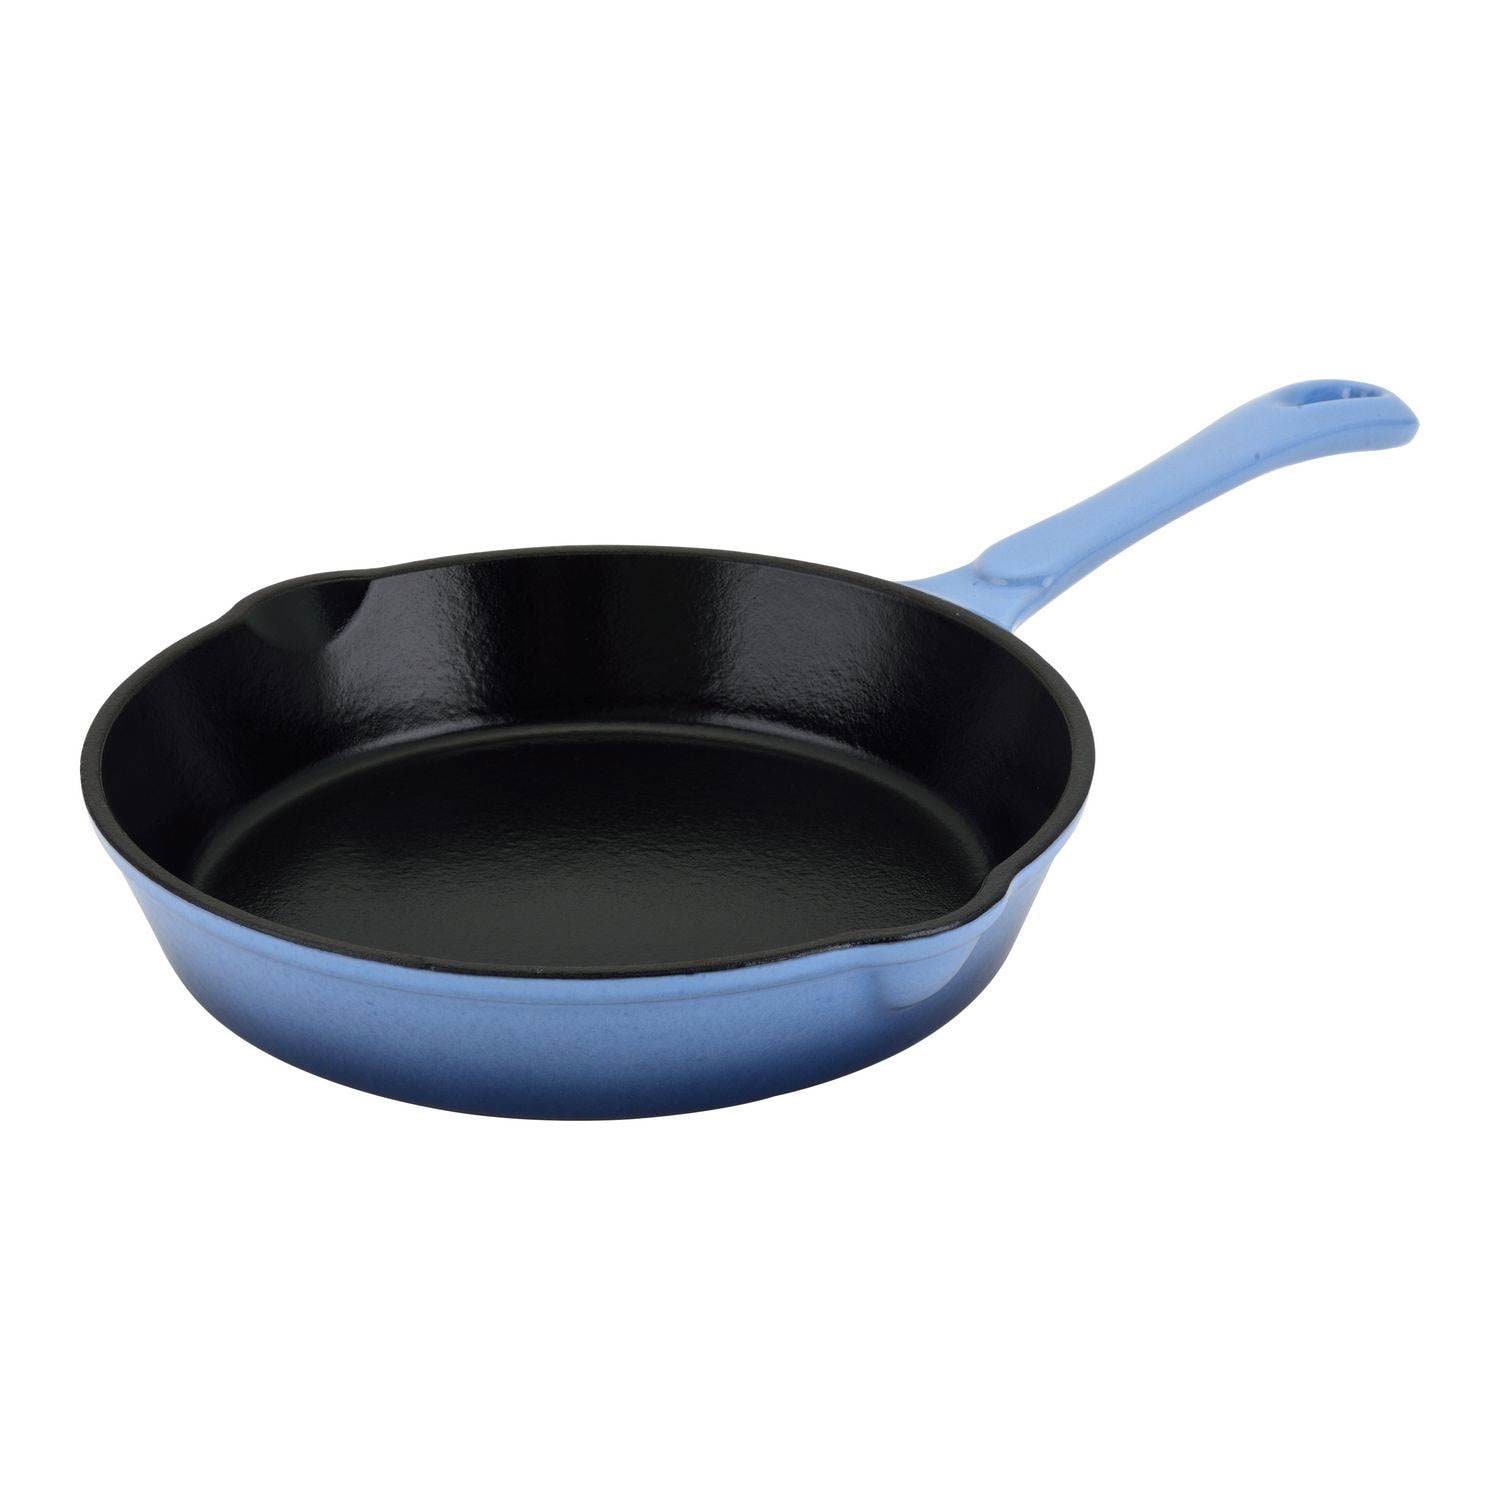 Good Cook Cast Iron 10 Inch Skillet